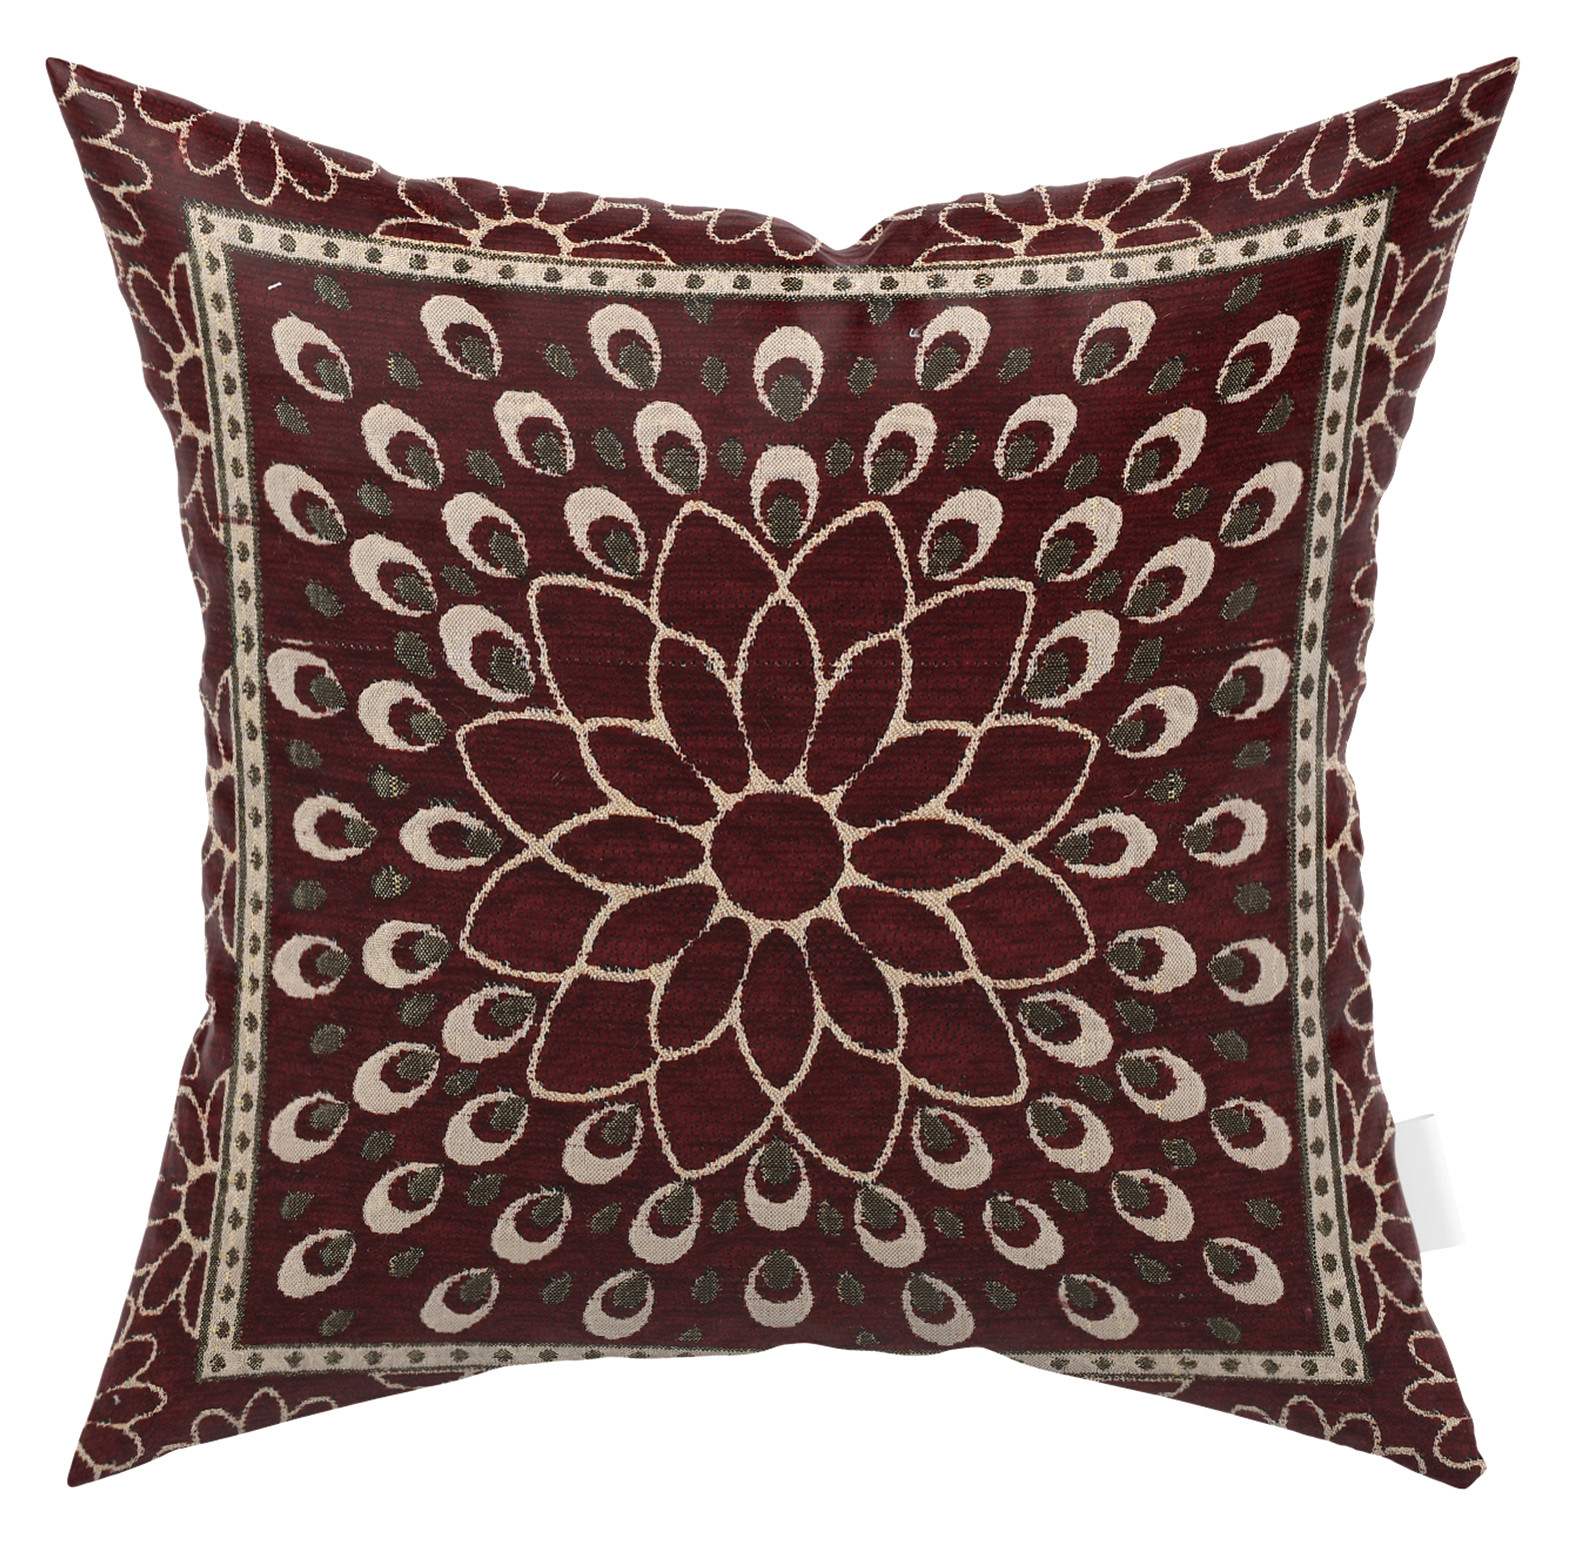 Kuber Industries Velvet Rangoli Design Soft Decorative Square Throw Pillow Cover, Cushion Covers, Pillow Case For Sofa Couch Bed Chair 16x16 Inch-(Maroon)